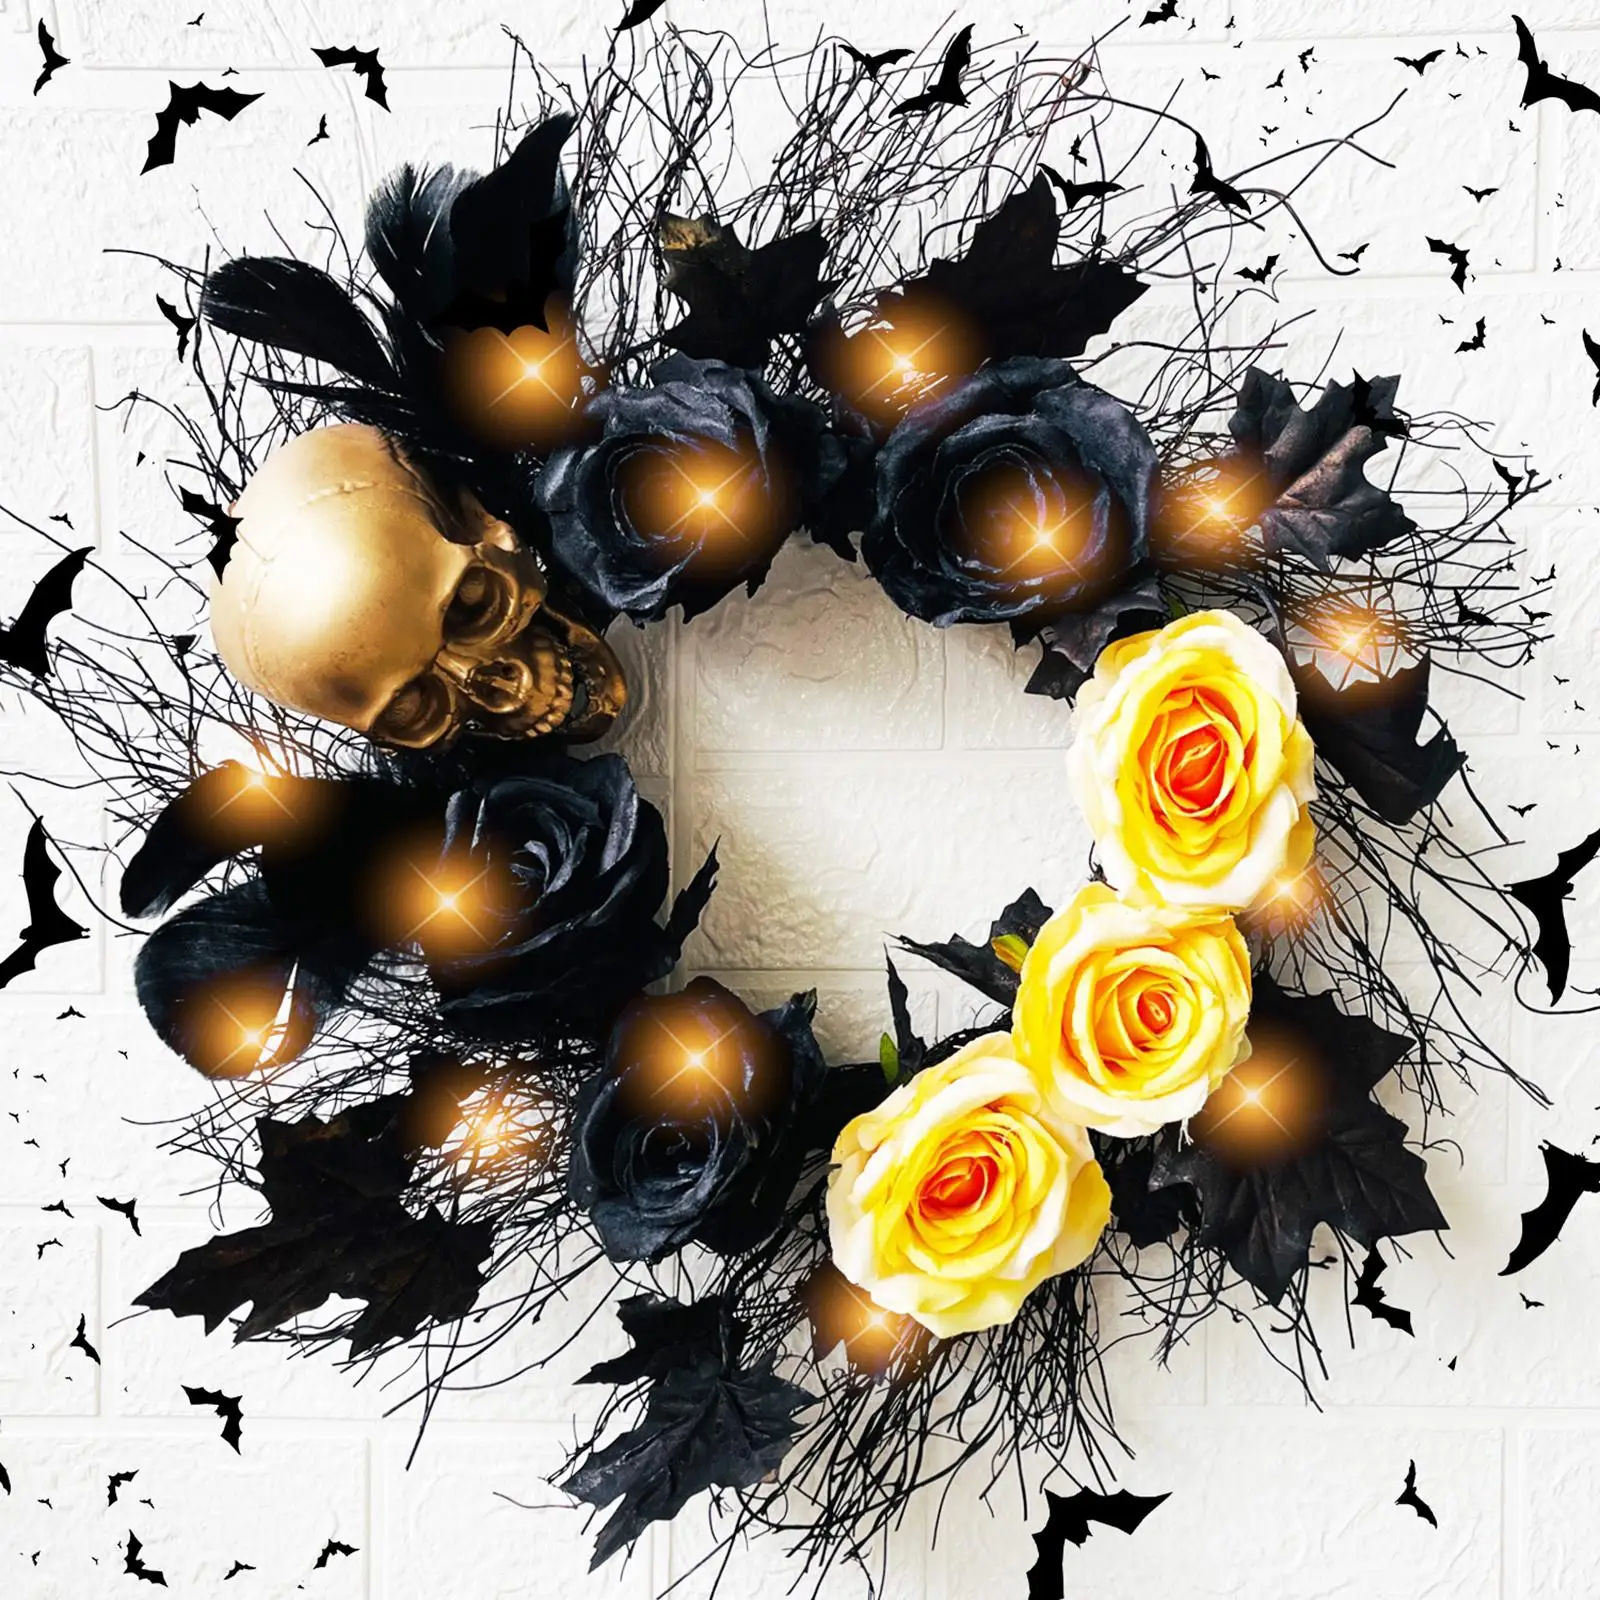 Gothic Skeleton Wreath Halloween with Maple Leaves Garland Rustic Skull Wreath for Window Farmhouse Party Decoration Mantelpiece